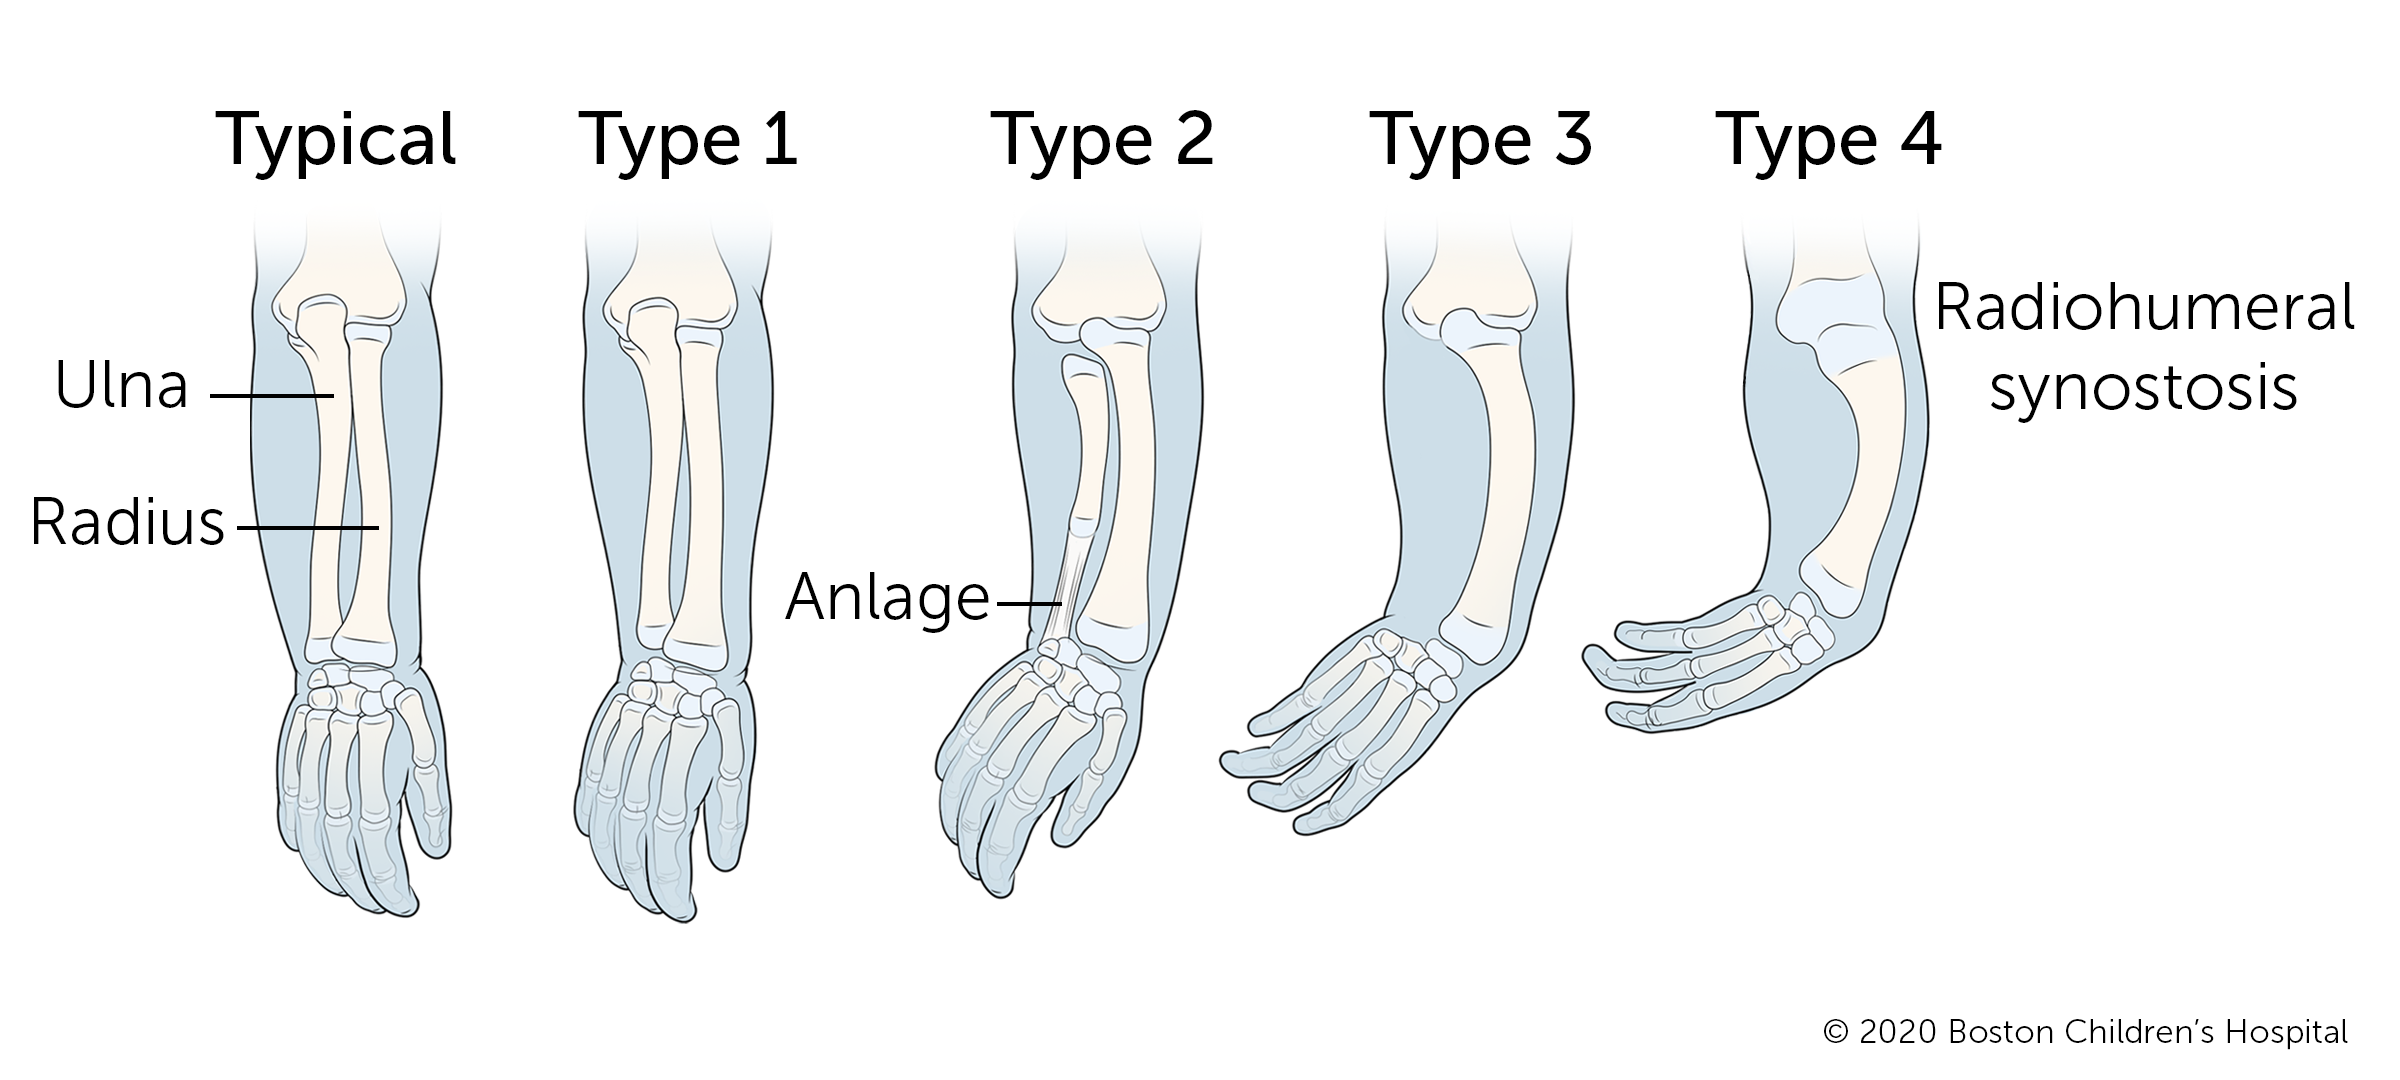 A typical arm compared to four types of ulnar longitudinal deficiency. In type 1, the ulna (the bone on the outside of the forearm) is slightly shorter than the radius (the bone on the inside of the forearm). In type 2, the ulna is significantly shorter than the radius and the hand is angled toward the outer arm. A bar of tissue called the anlage connects the end of the ulna to the wrist. In types 3 and 4, the ulna and thumb are completely missing. Other fingers can be missing or formed differently.